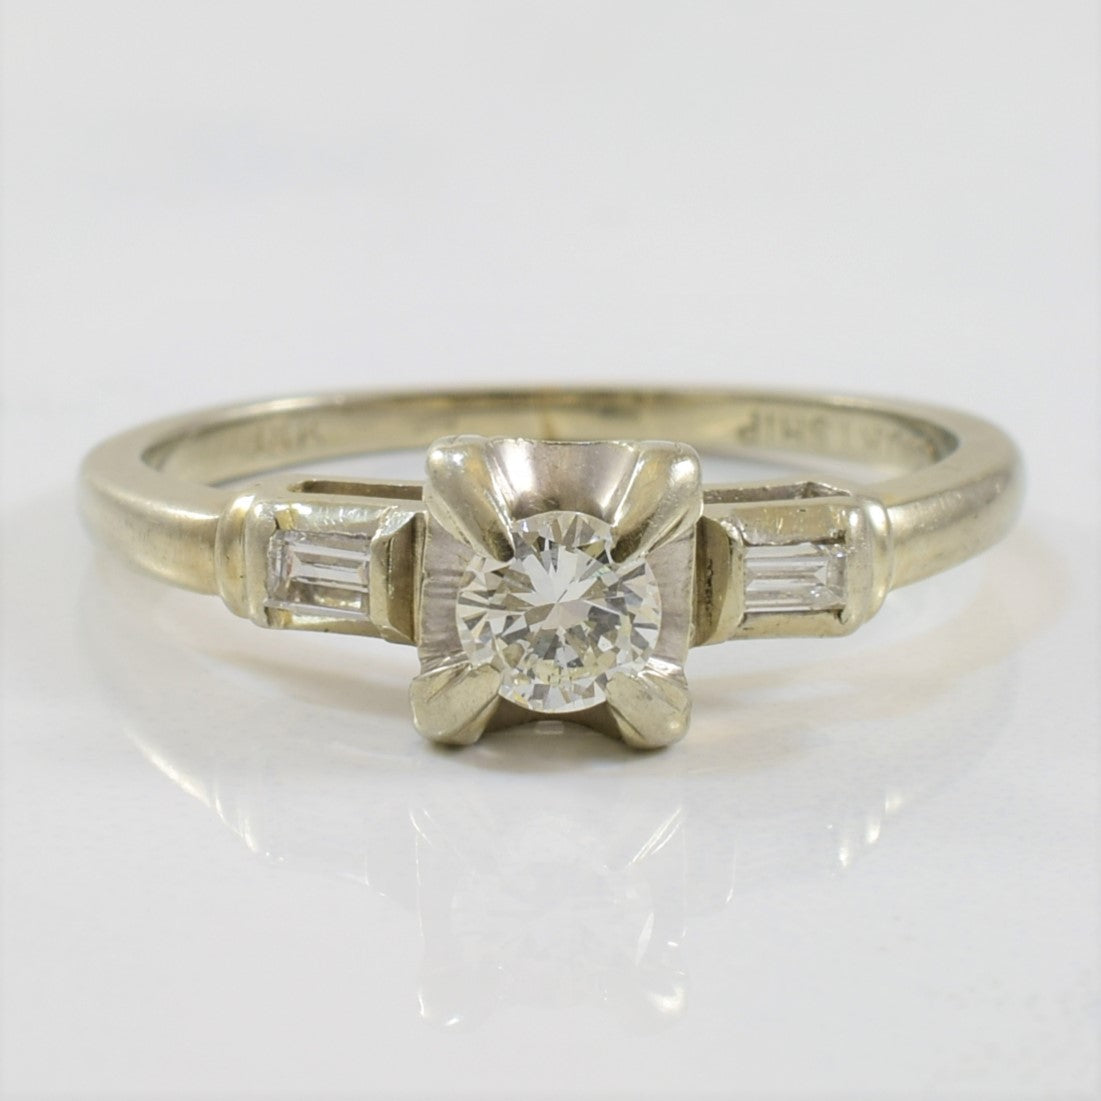 Courtship' Early 1930s Three Stone Engagement Ring | 0.25ctw | SZ 6.25 |